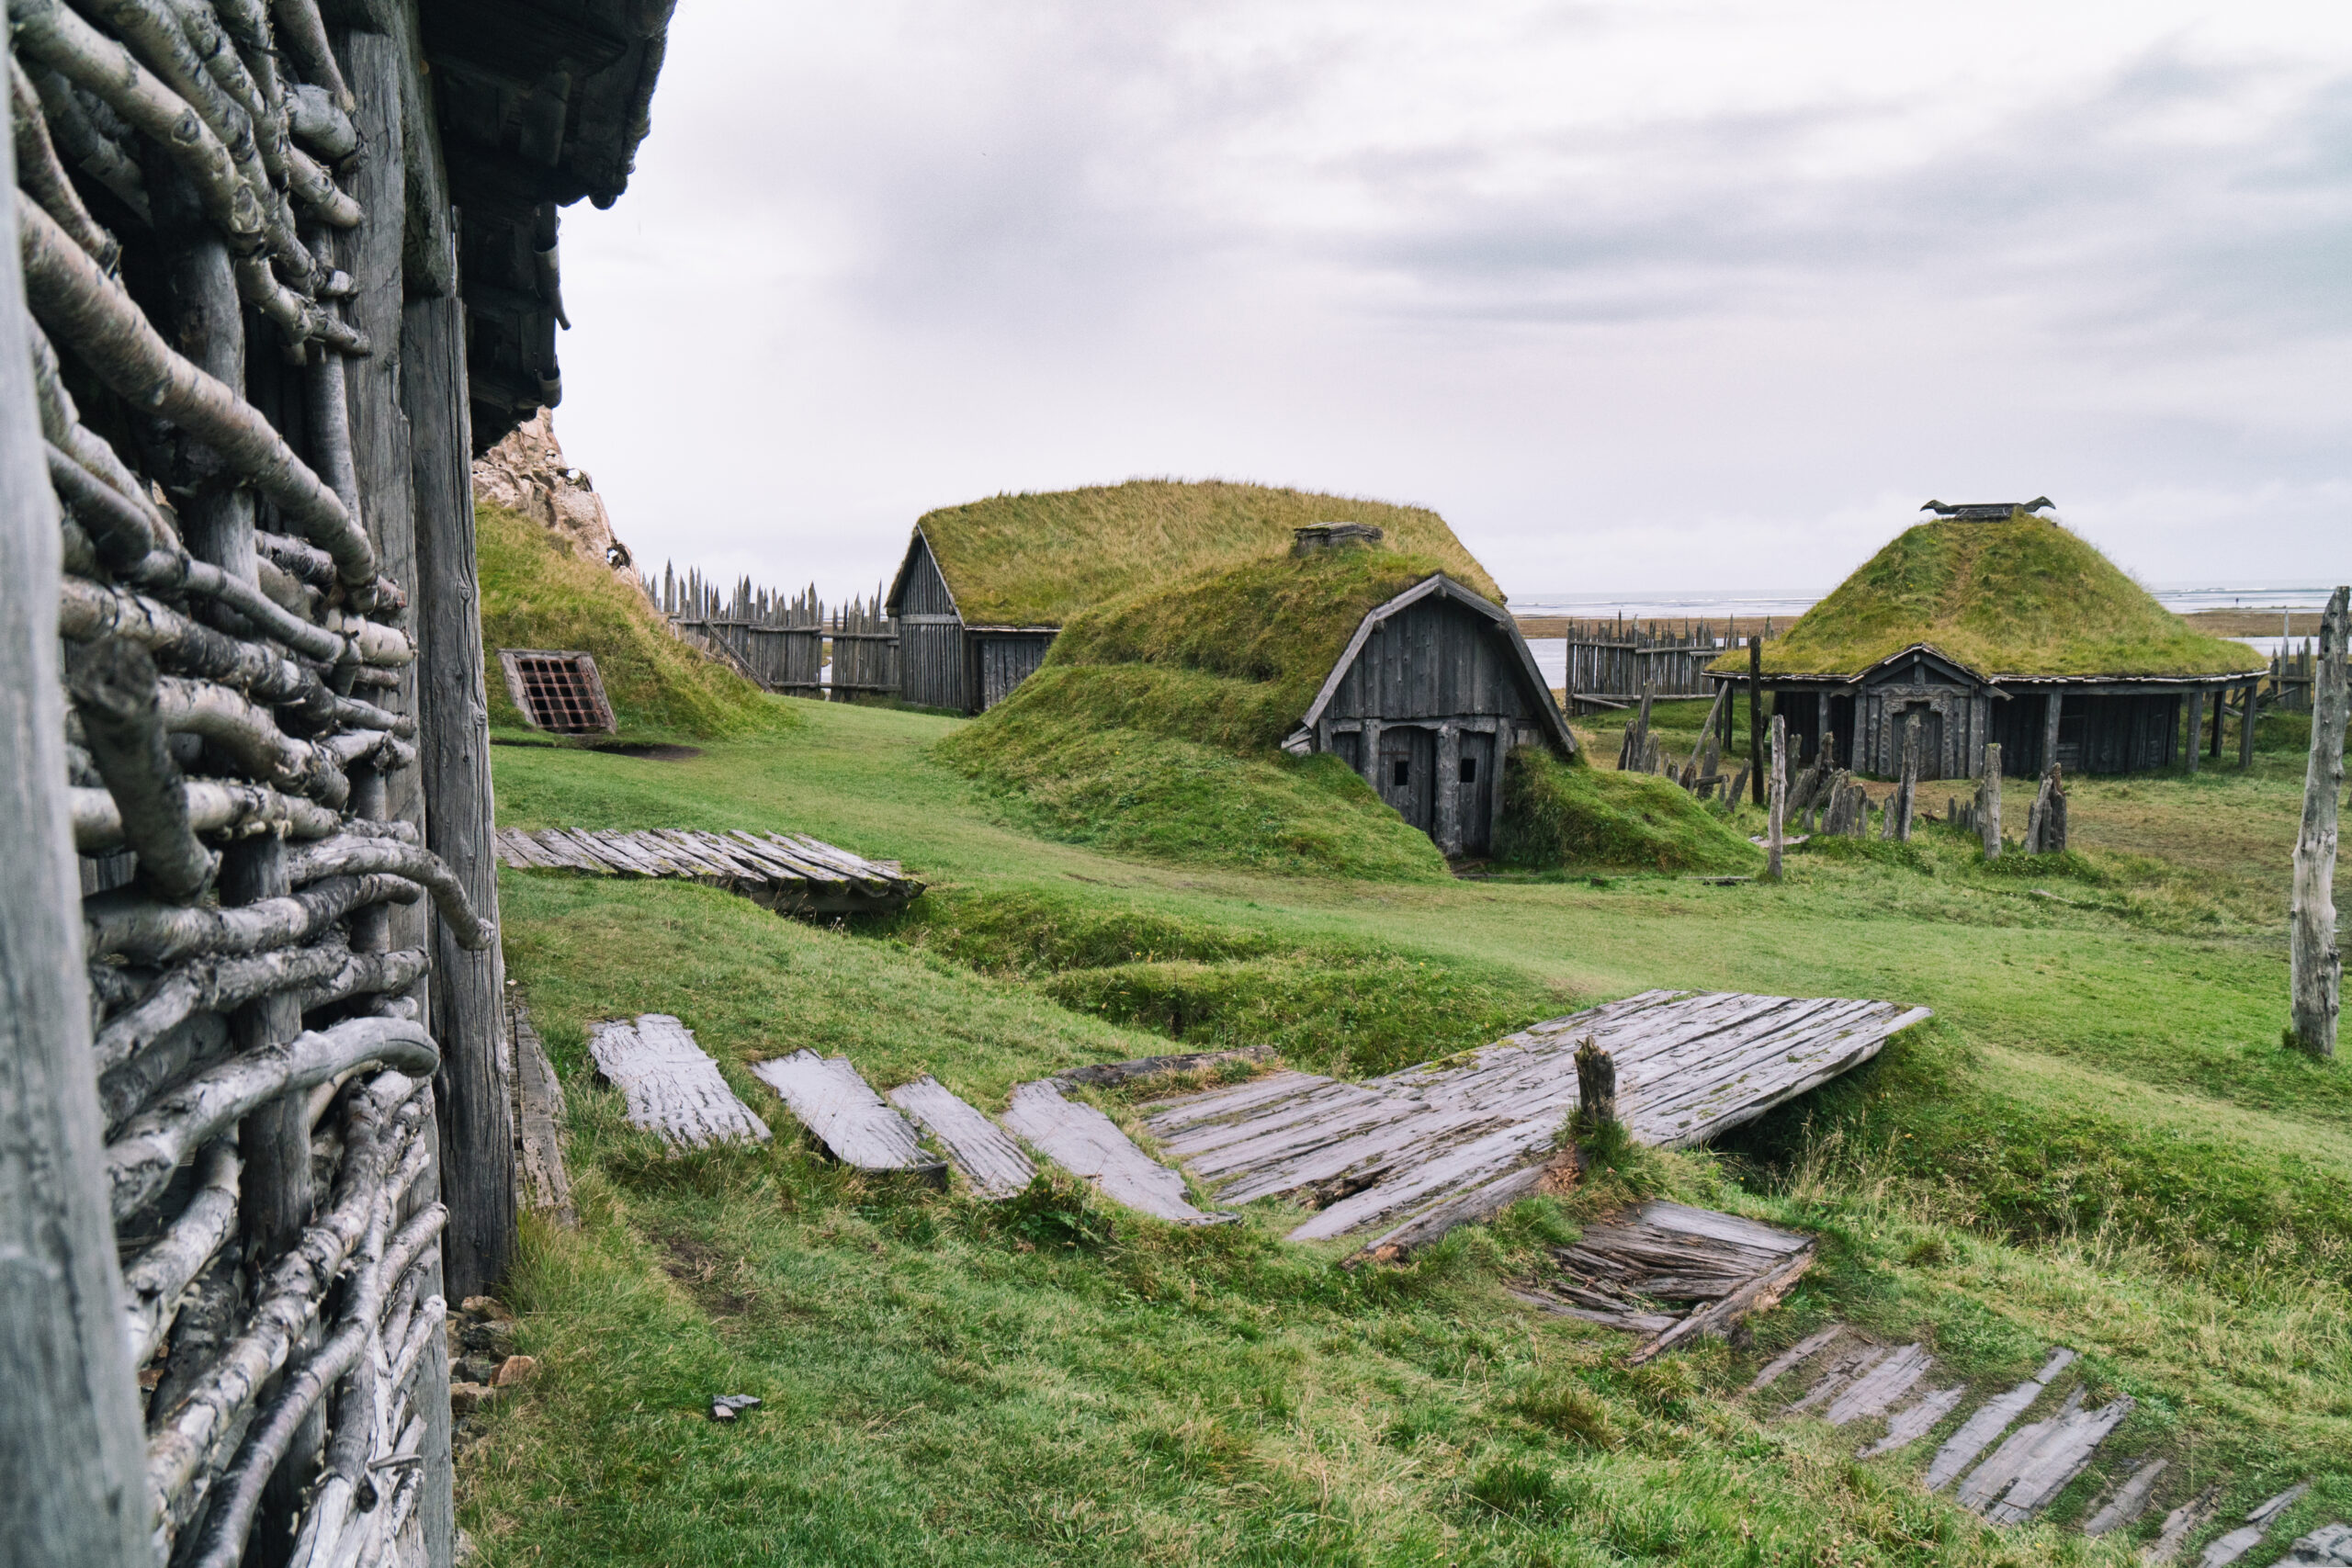 Viking Farming: What Life Was Like In-Between the Pillage